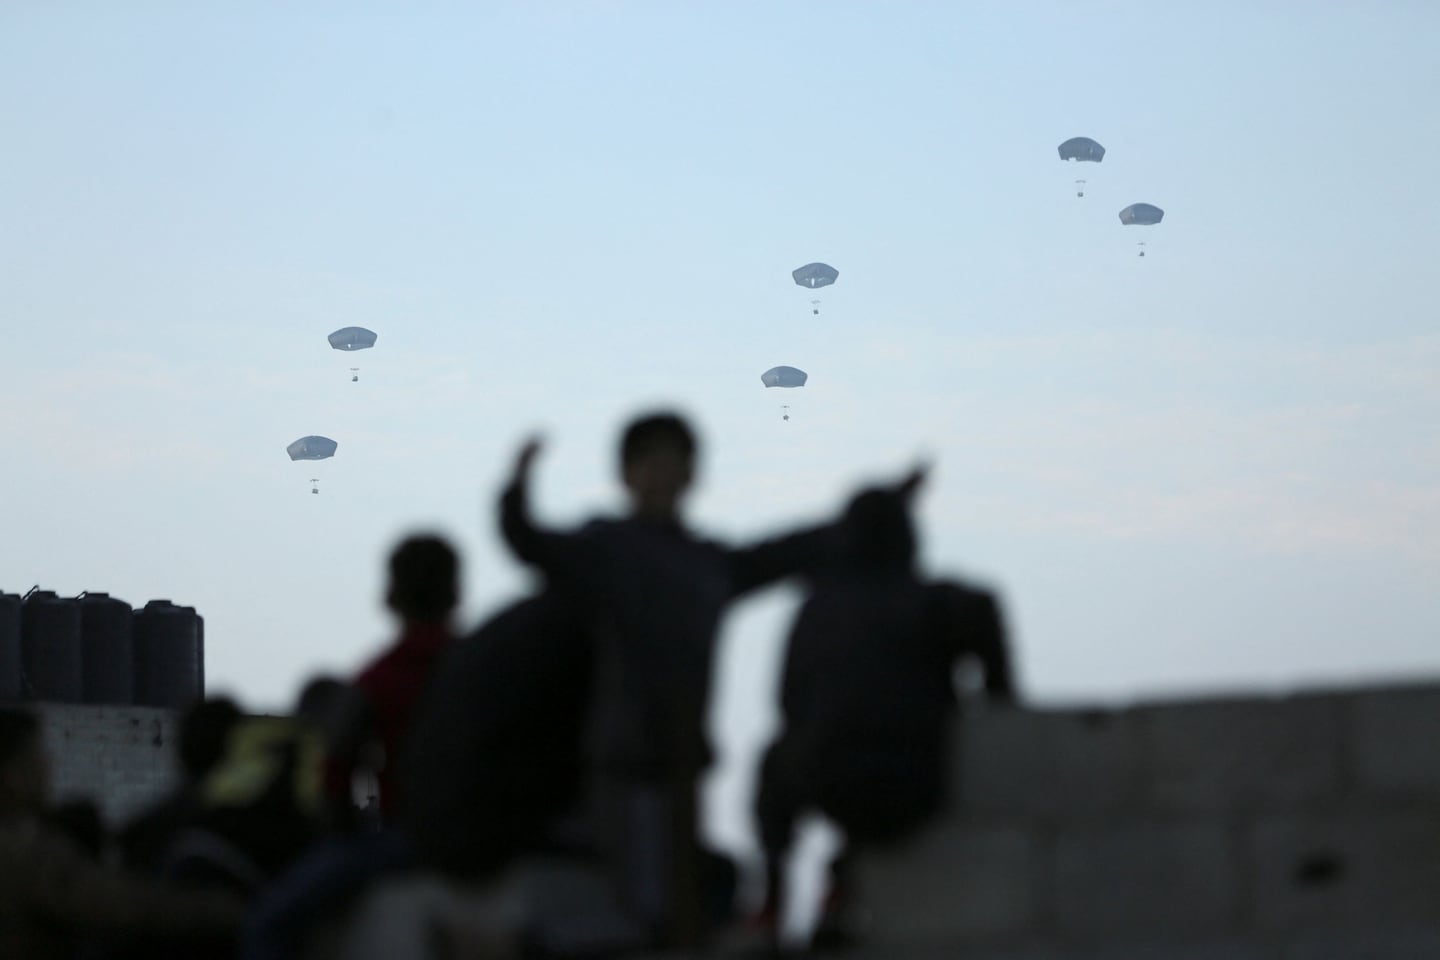 As Gaza crisis intensifies, U.S. conducts first airdrop of aid